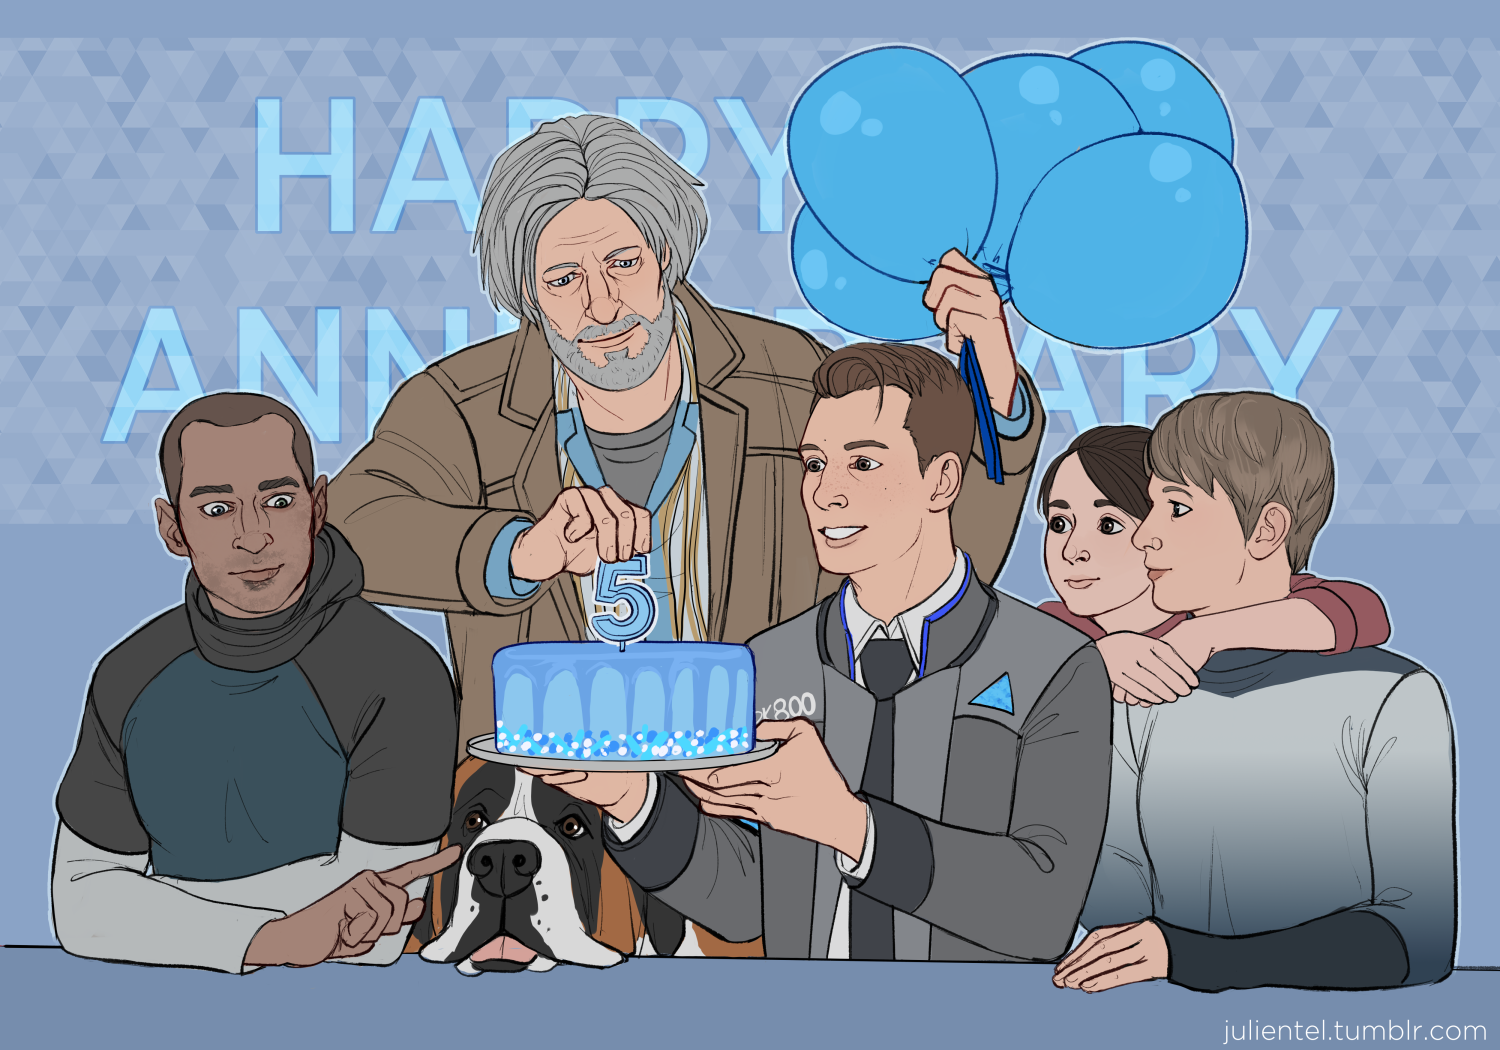 This art was made by julientel(tumblr) : r/DetroitBecomeHuman